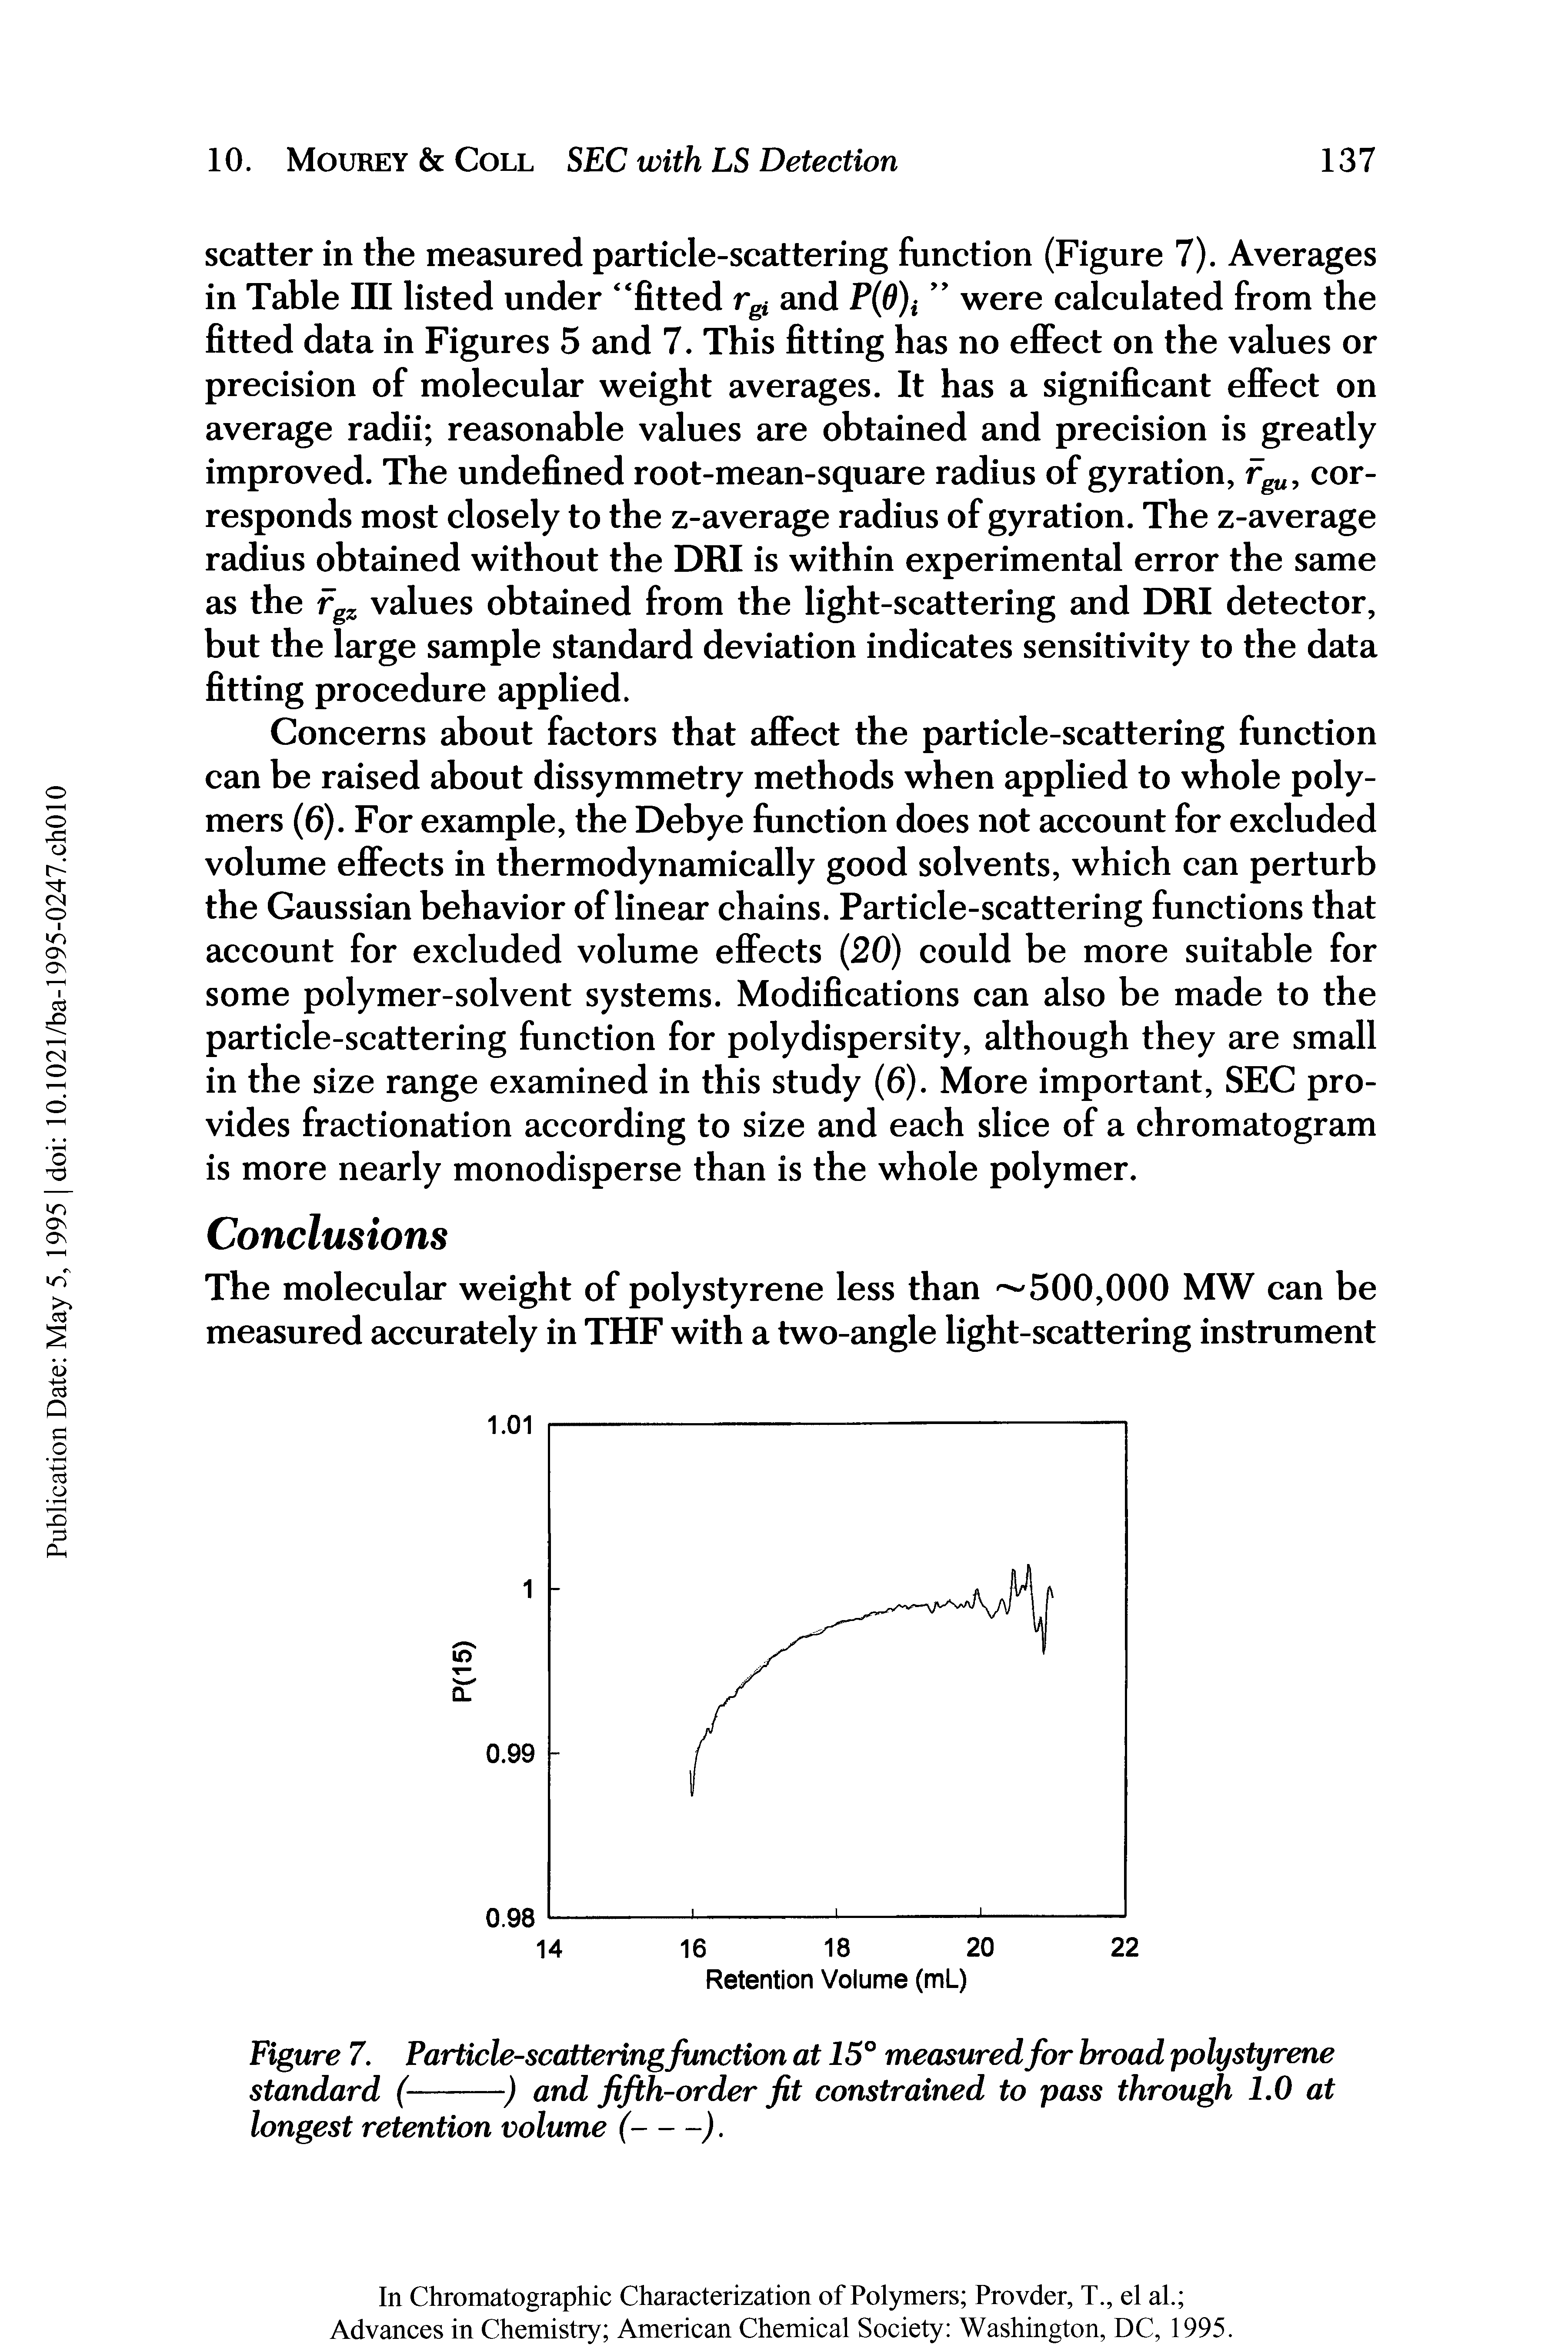 Figure 7. Particle-scatteringfunction at 15° measured for broad polystyrene...